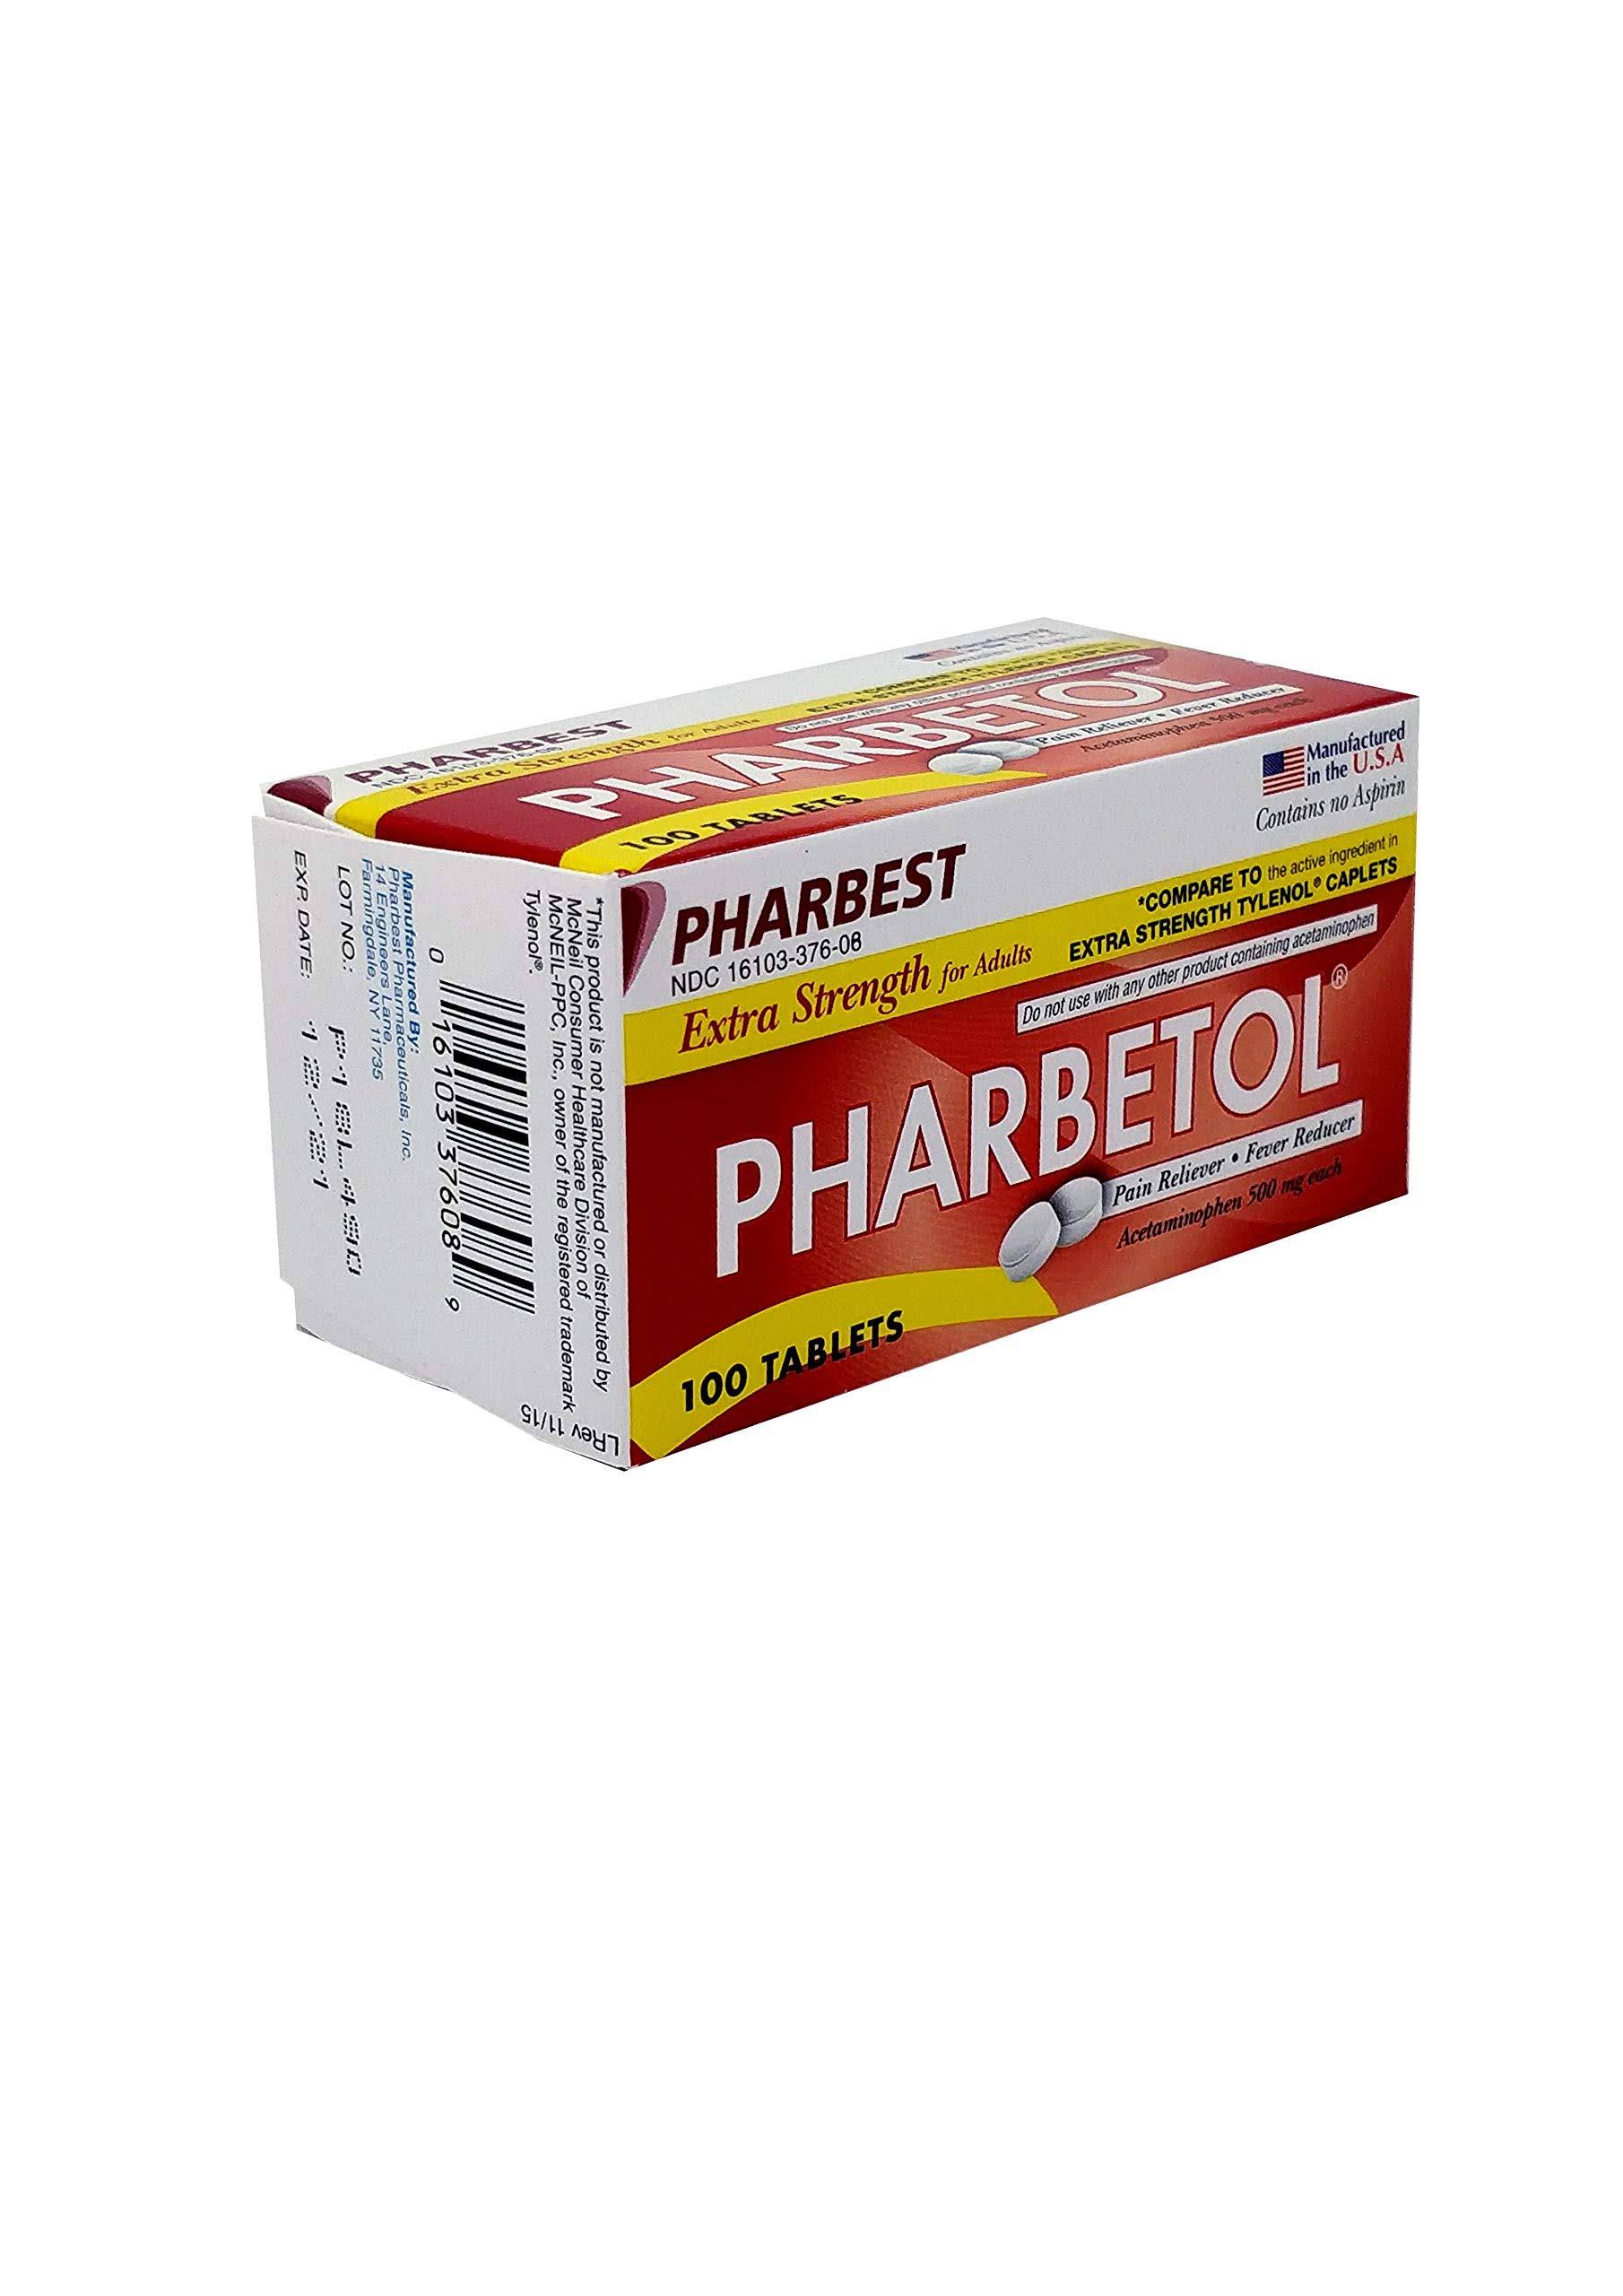 Pharbetol 500mg Extra Strength Tablets 100 Count